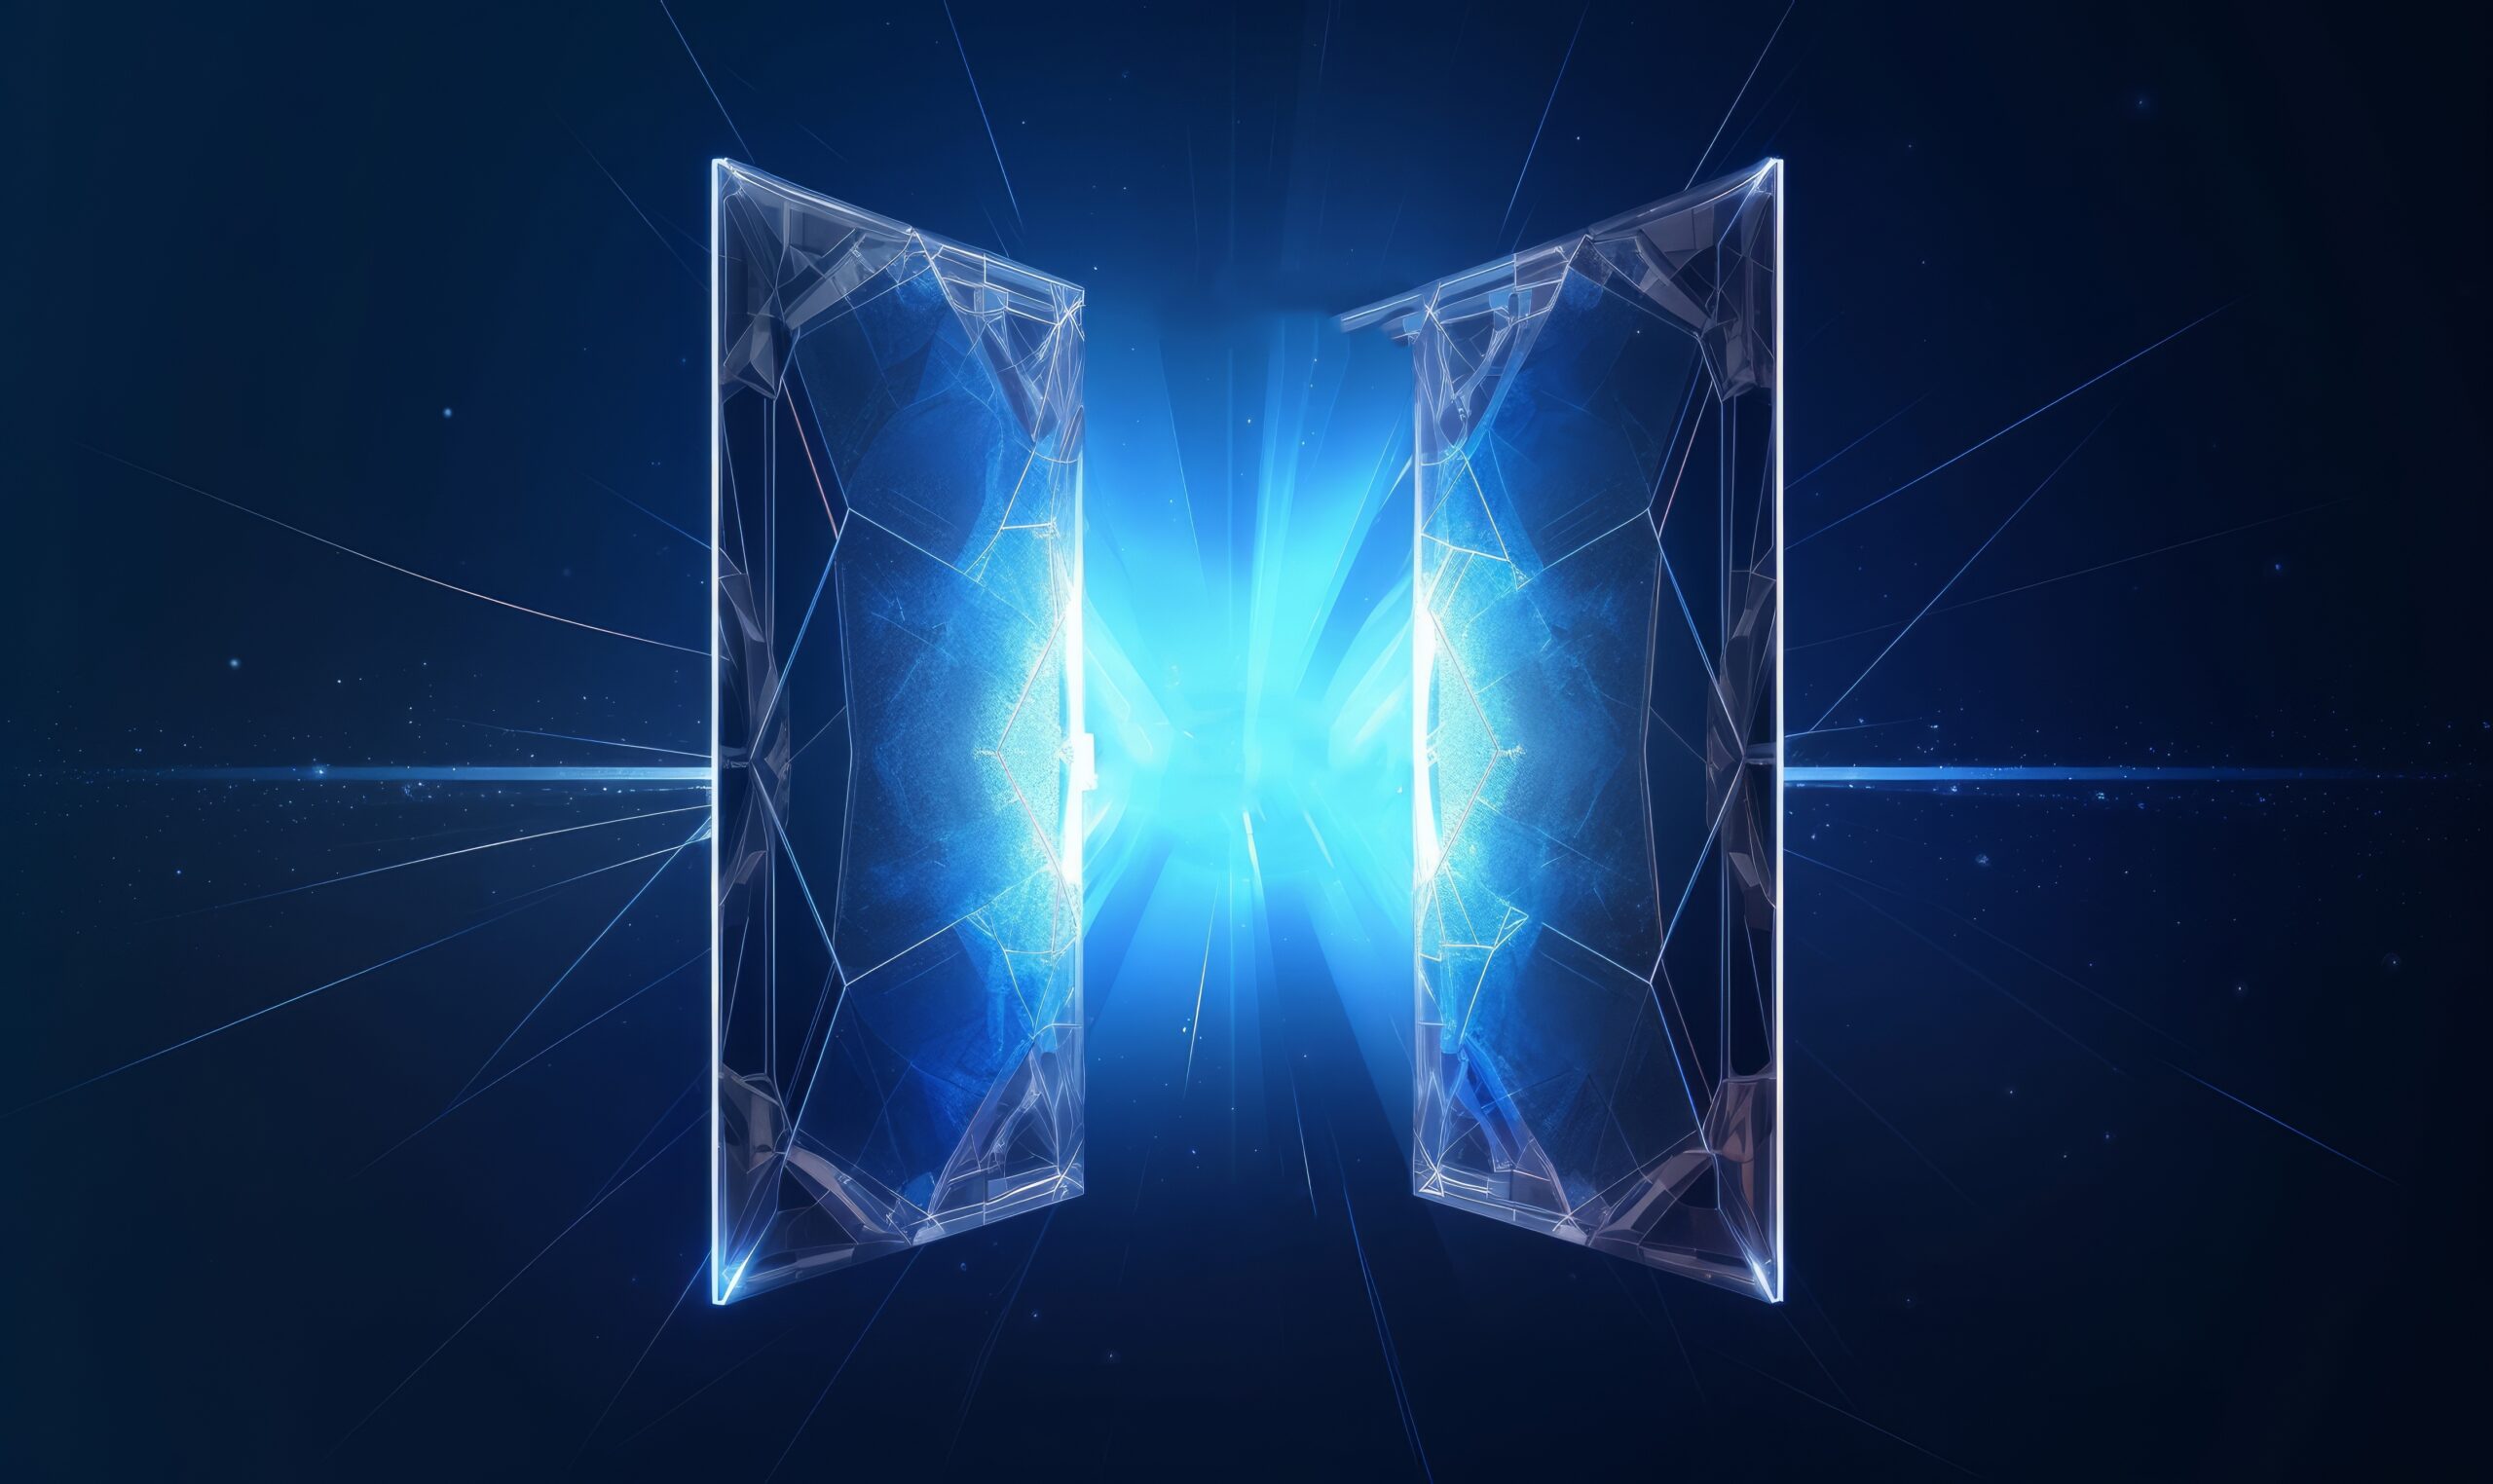 Open door digital illustration on a blue background. Futuristic science fiction concept of doorway. Technology portal in a polygonal wireframe glowing